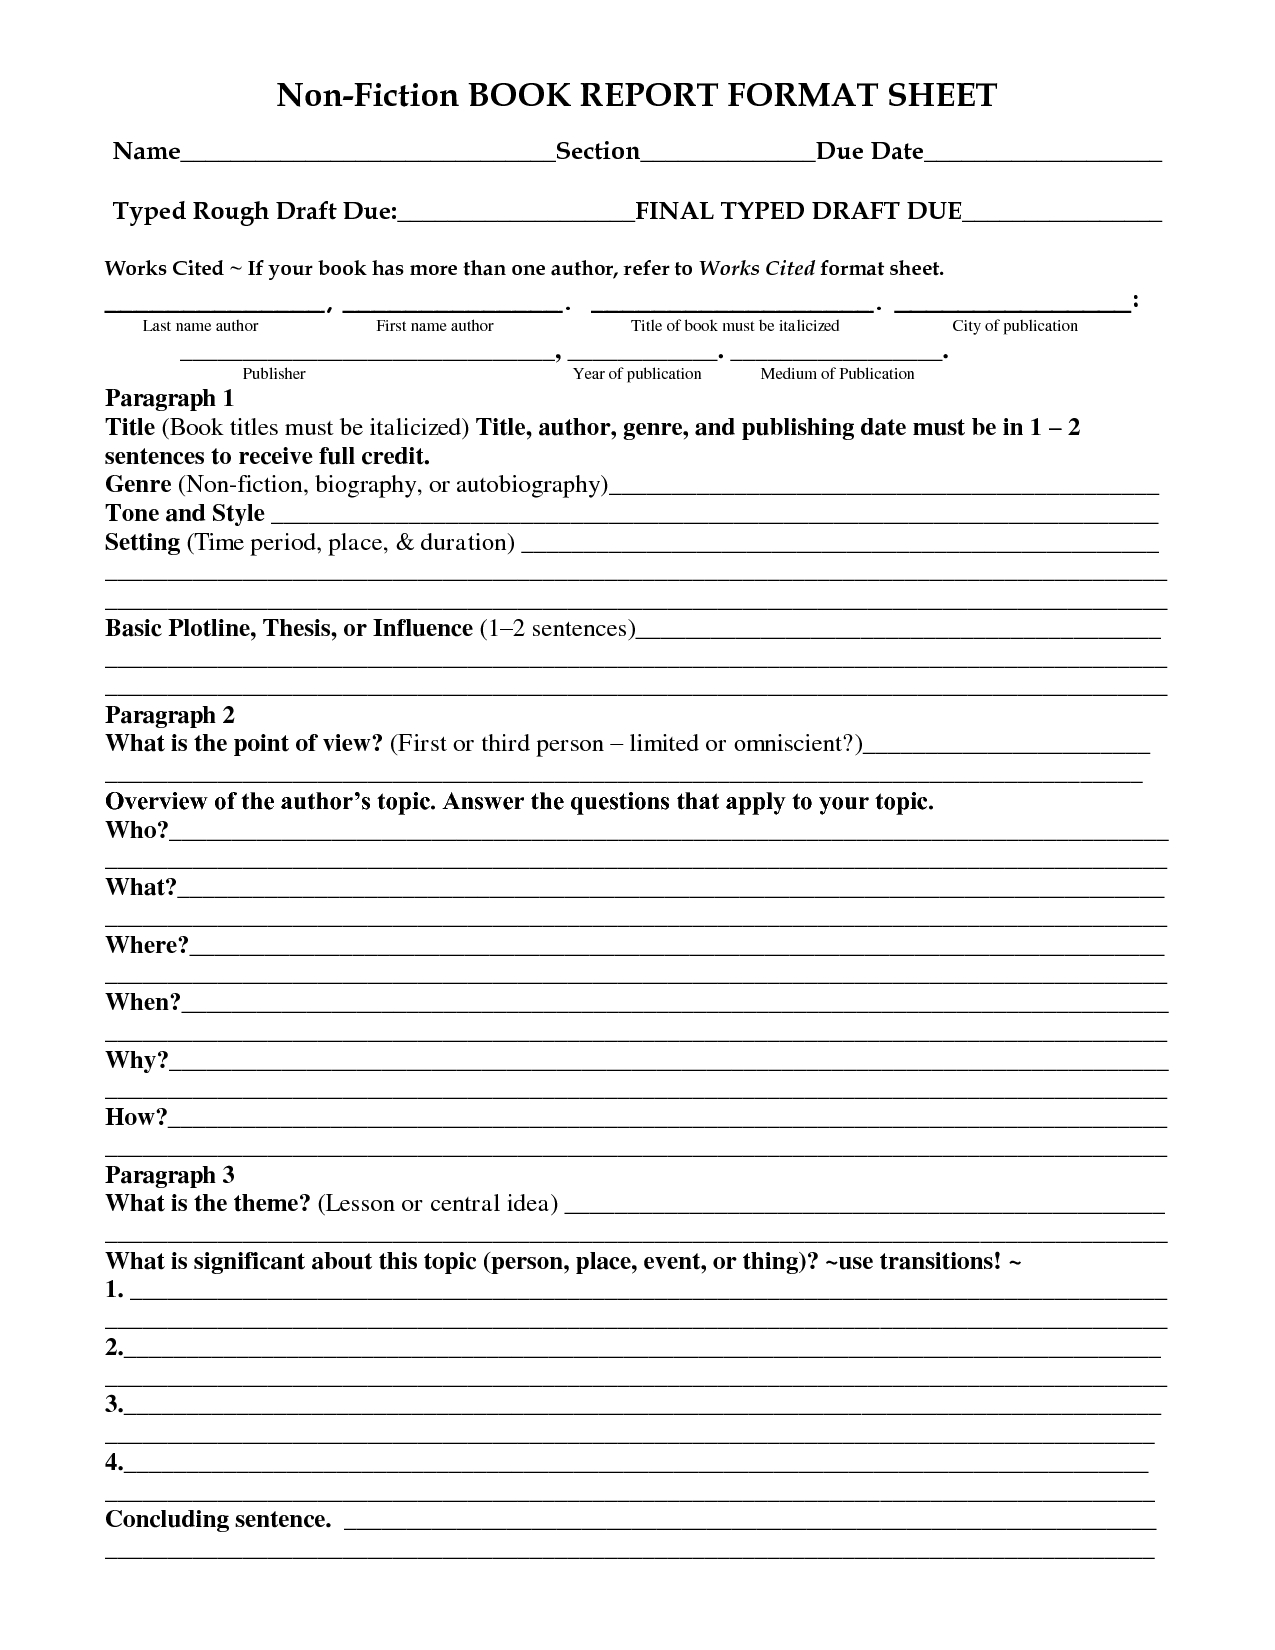 28 Images Of 5Th Grade Non Fiction Book Report Template Throughout Nonfiction Book Report Template